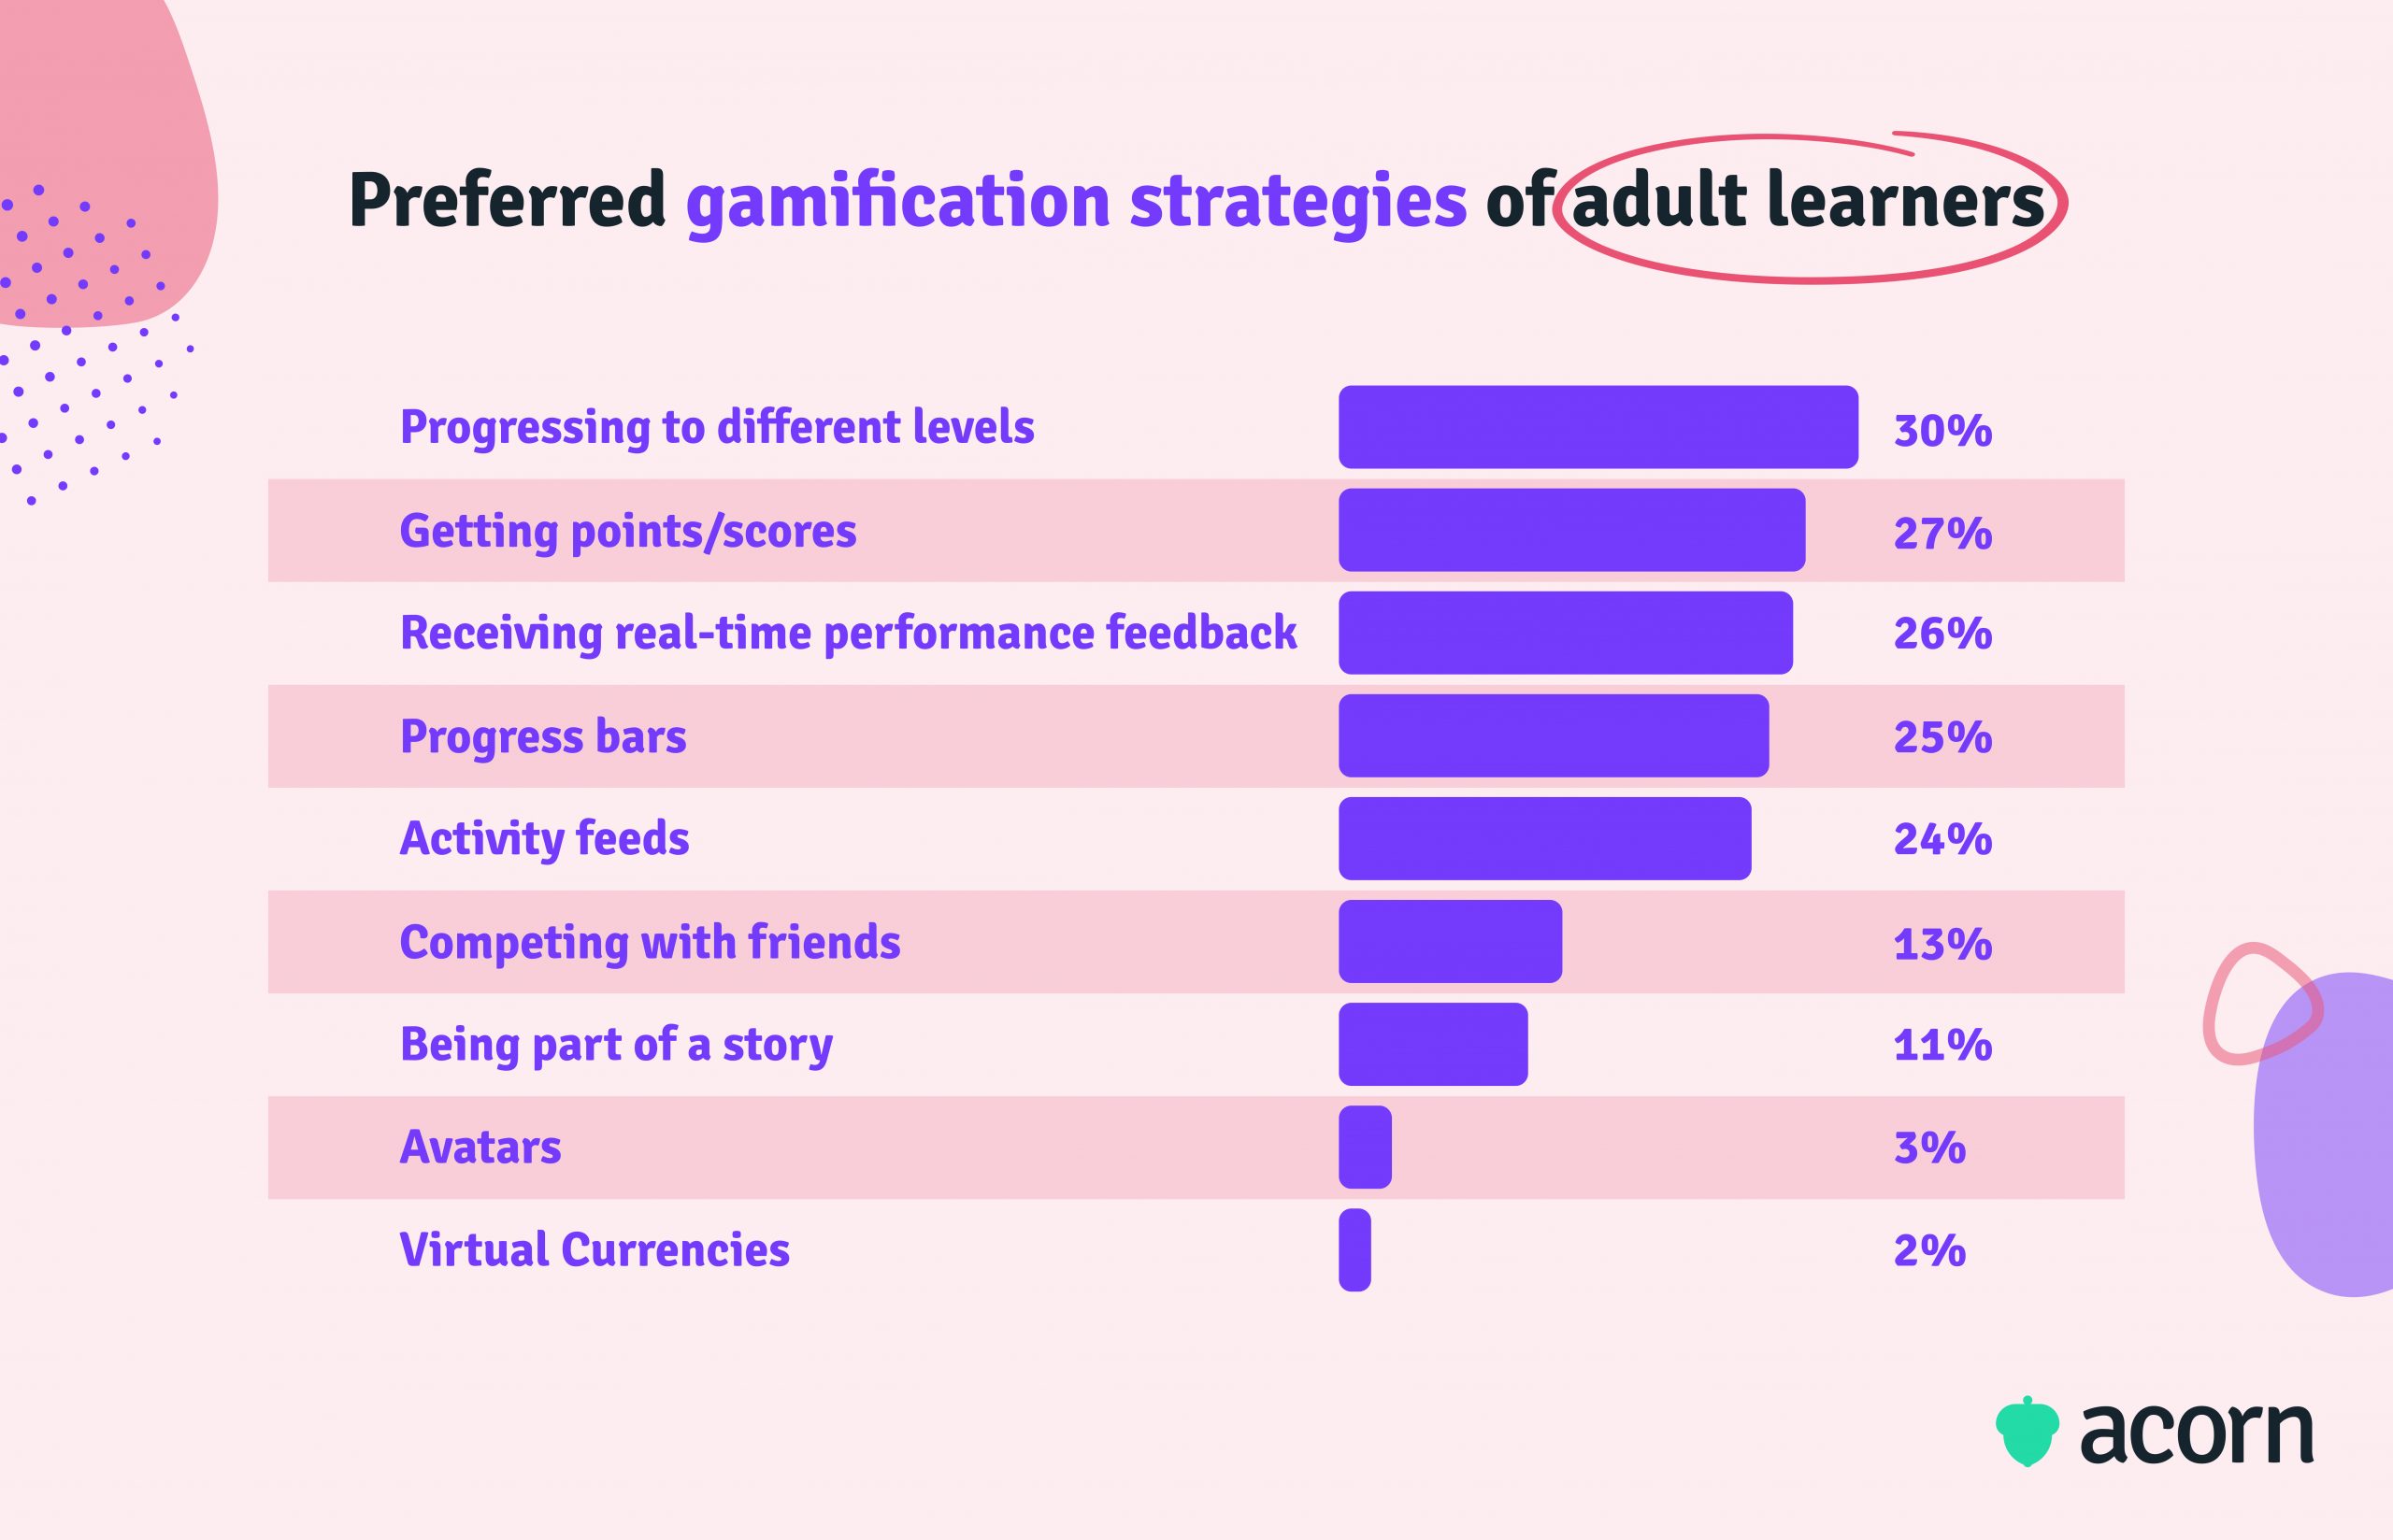 Bar chart of the preferred gamification strategies of adult learners